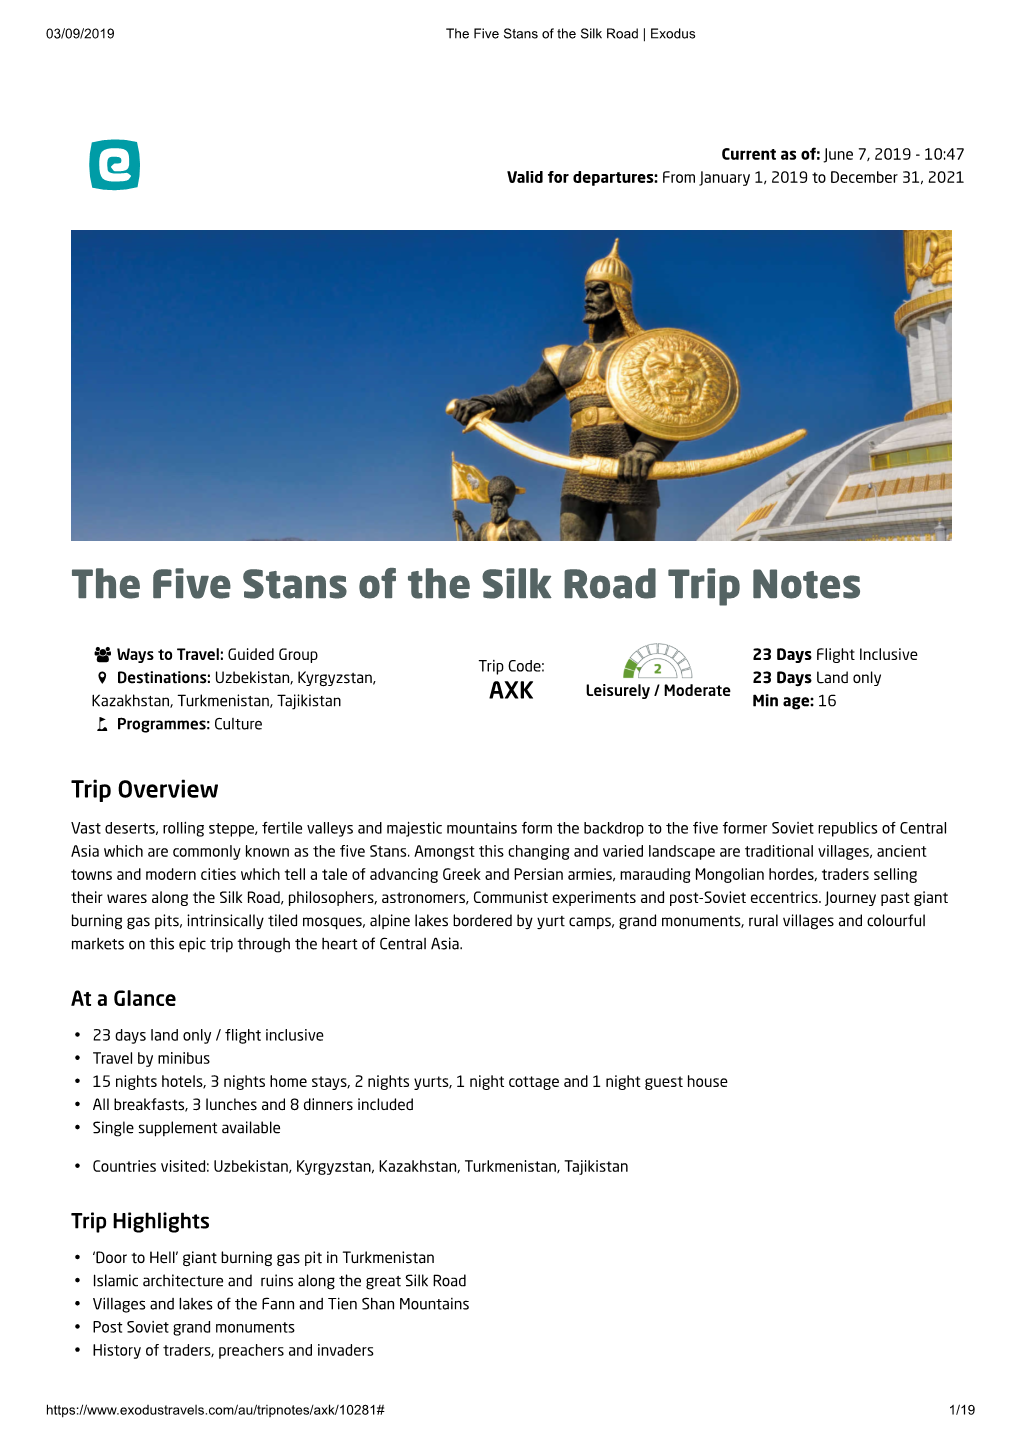 The Five Stans of the Silk Road Trip Notes